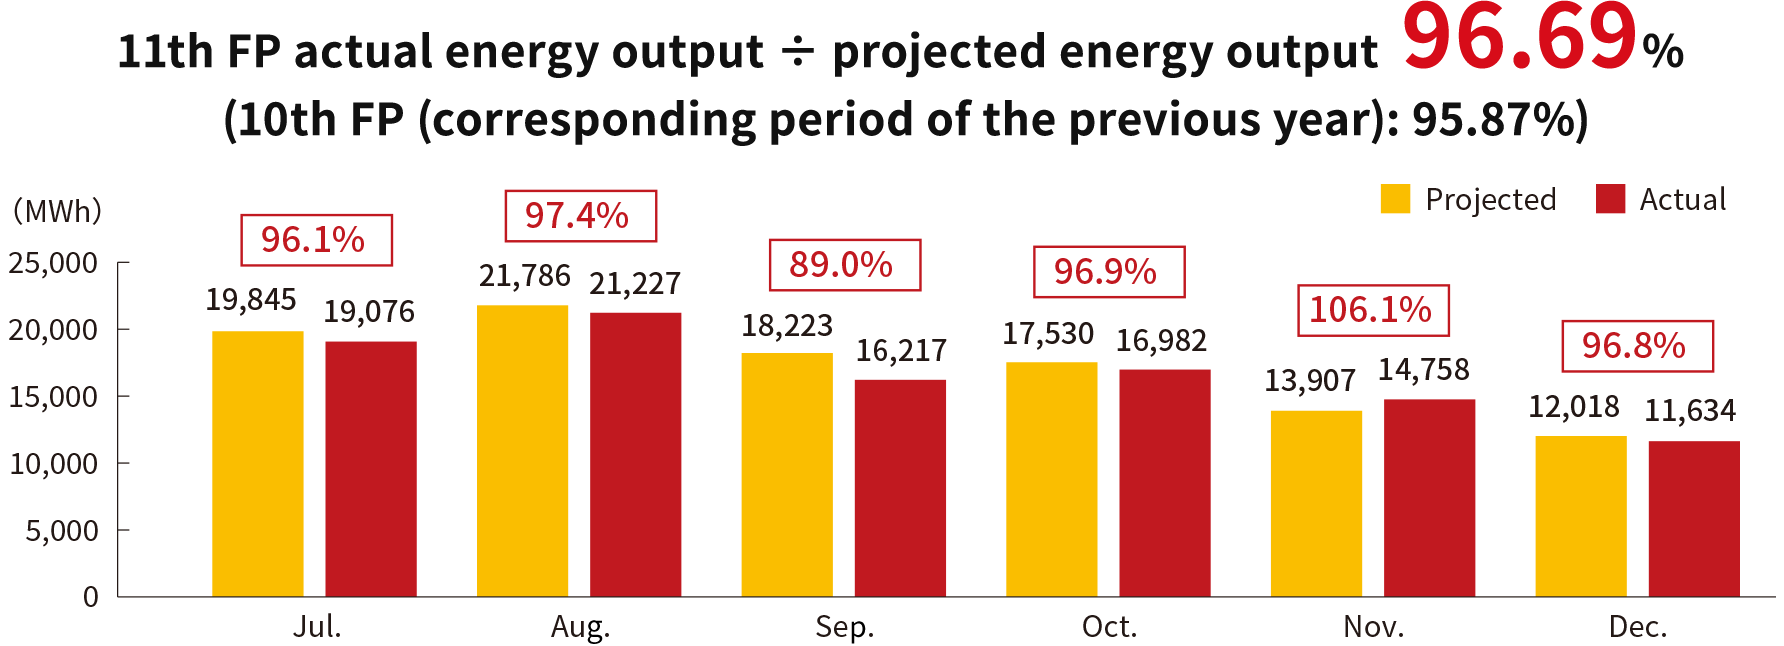 11th FP actual energy output ÷ projected energy output  96.69% (9th FP (corresponding period of the previous year): 95.87%)